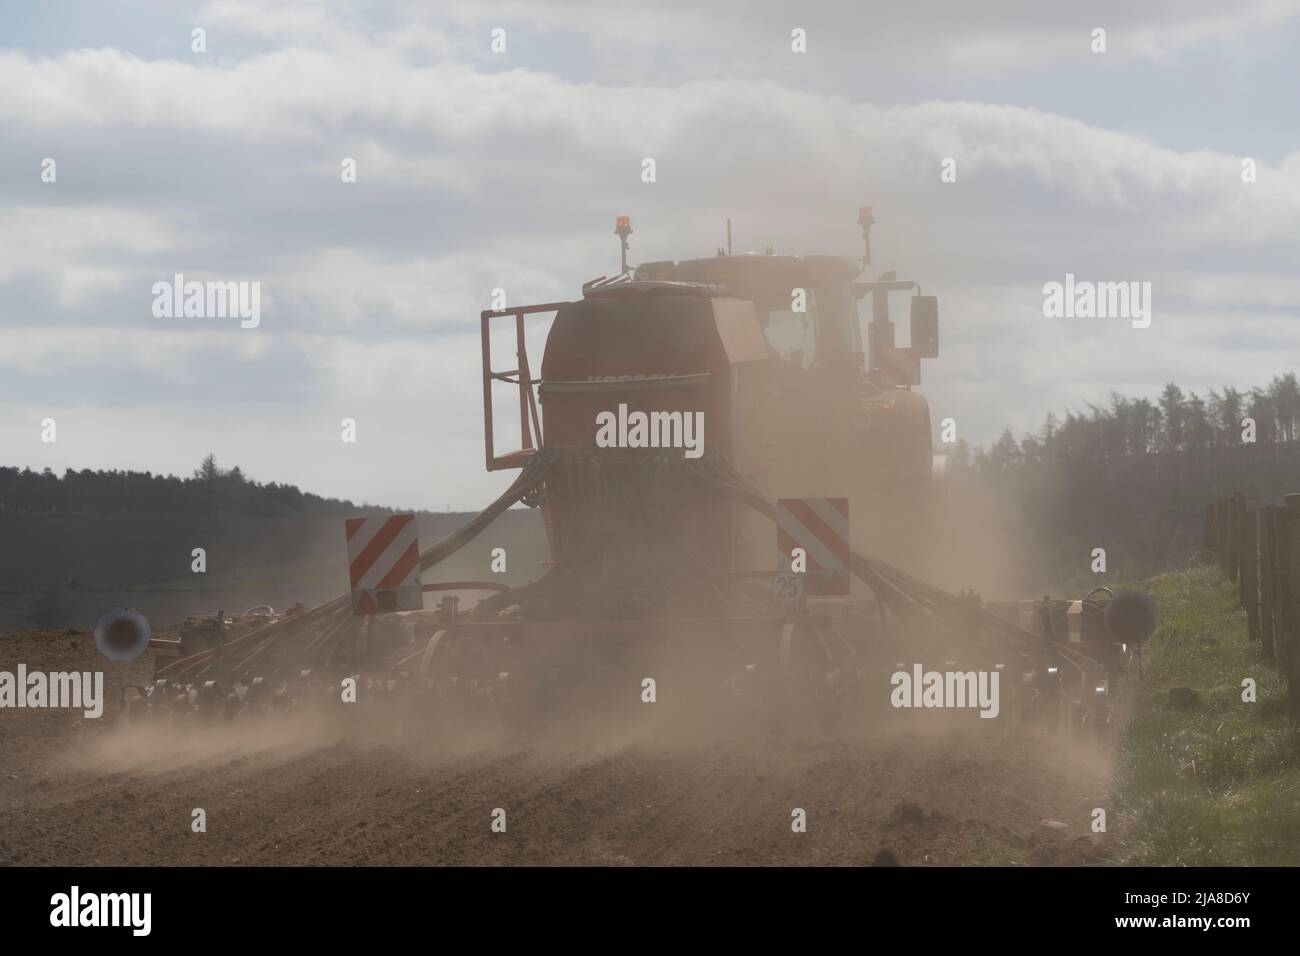 A View from the Rear of a Disc Seed Drill Operating in a Ploughed Field in Dry Weather and Creating Clouds of Dust, Backlit by Bright Sunshine Stock Photo